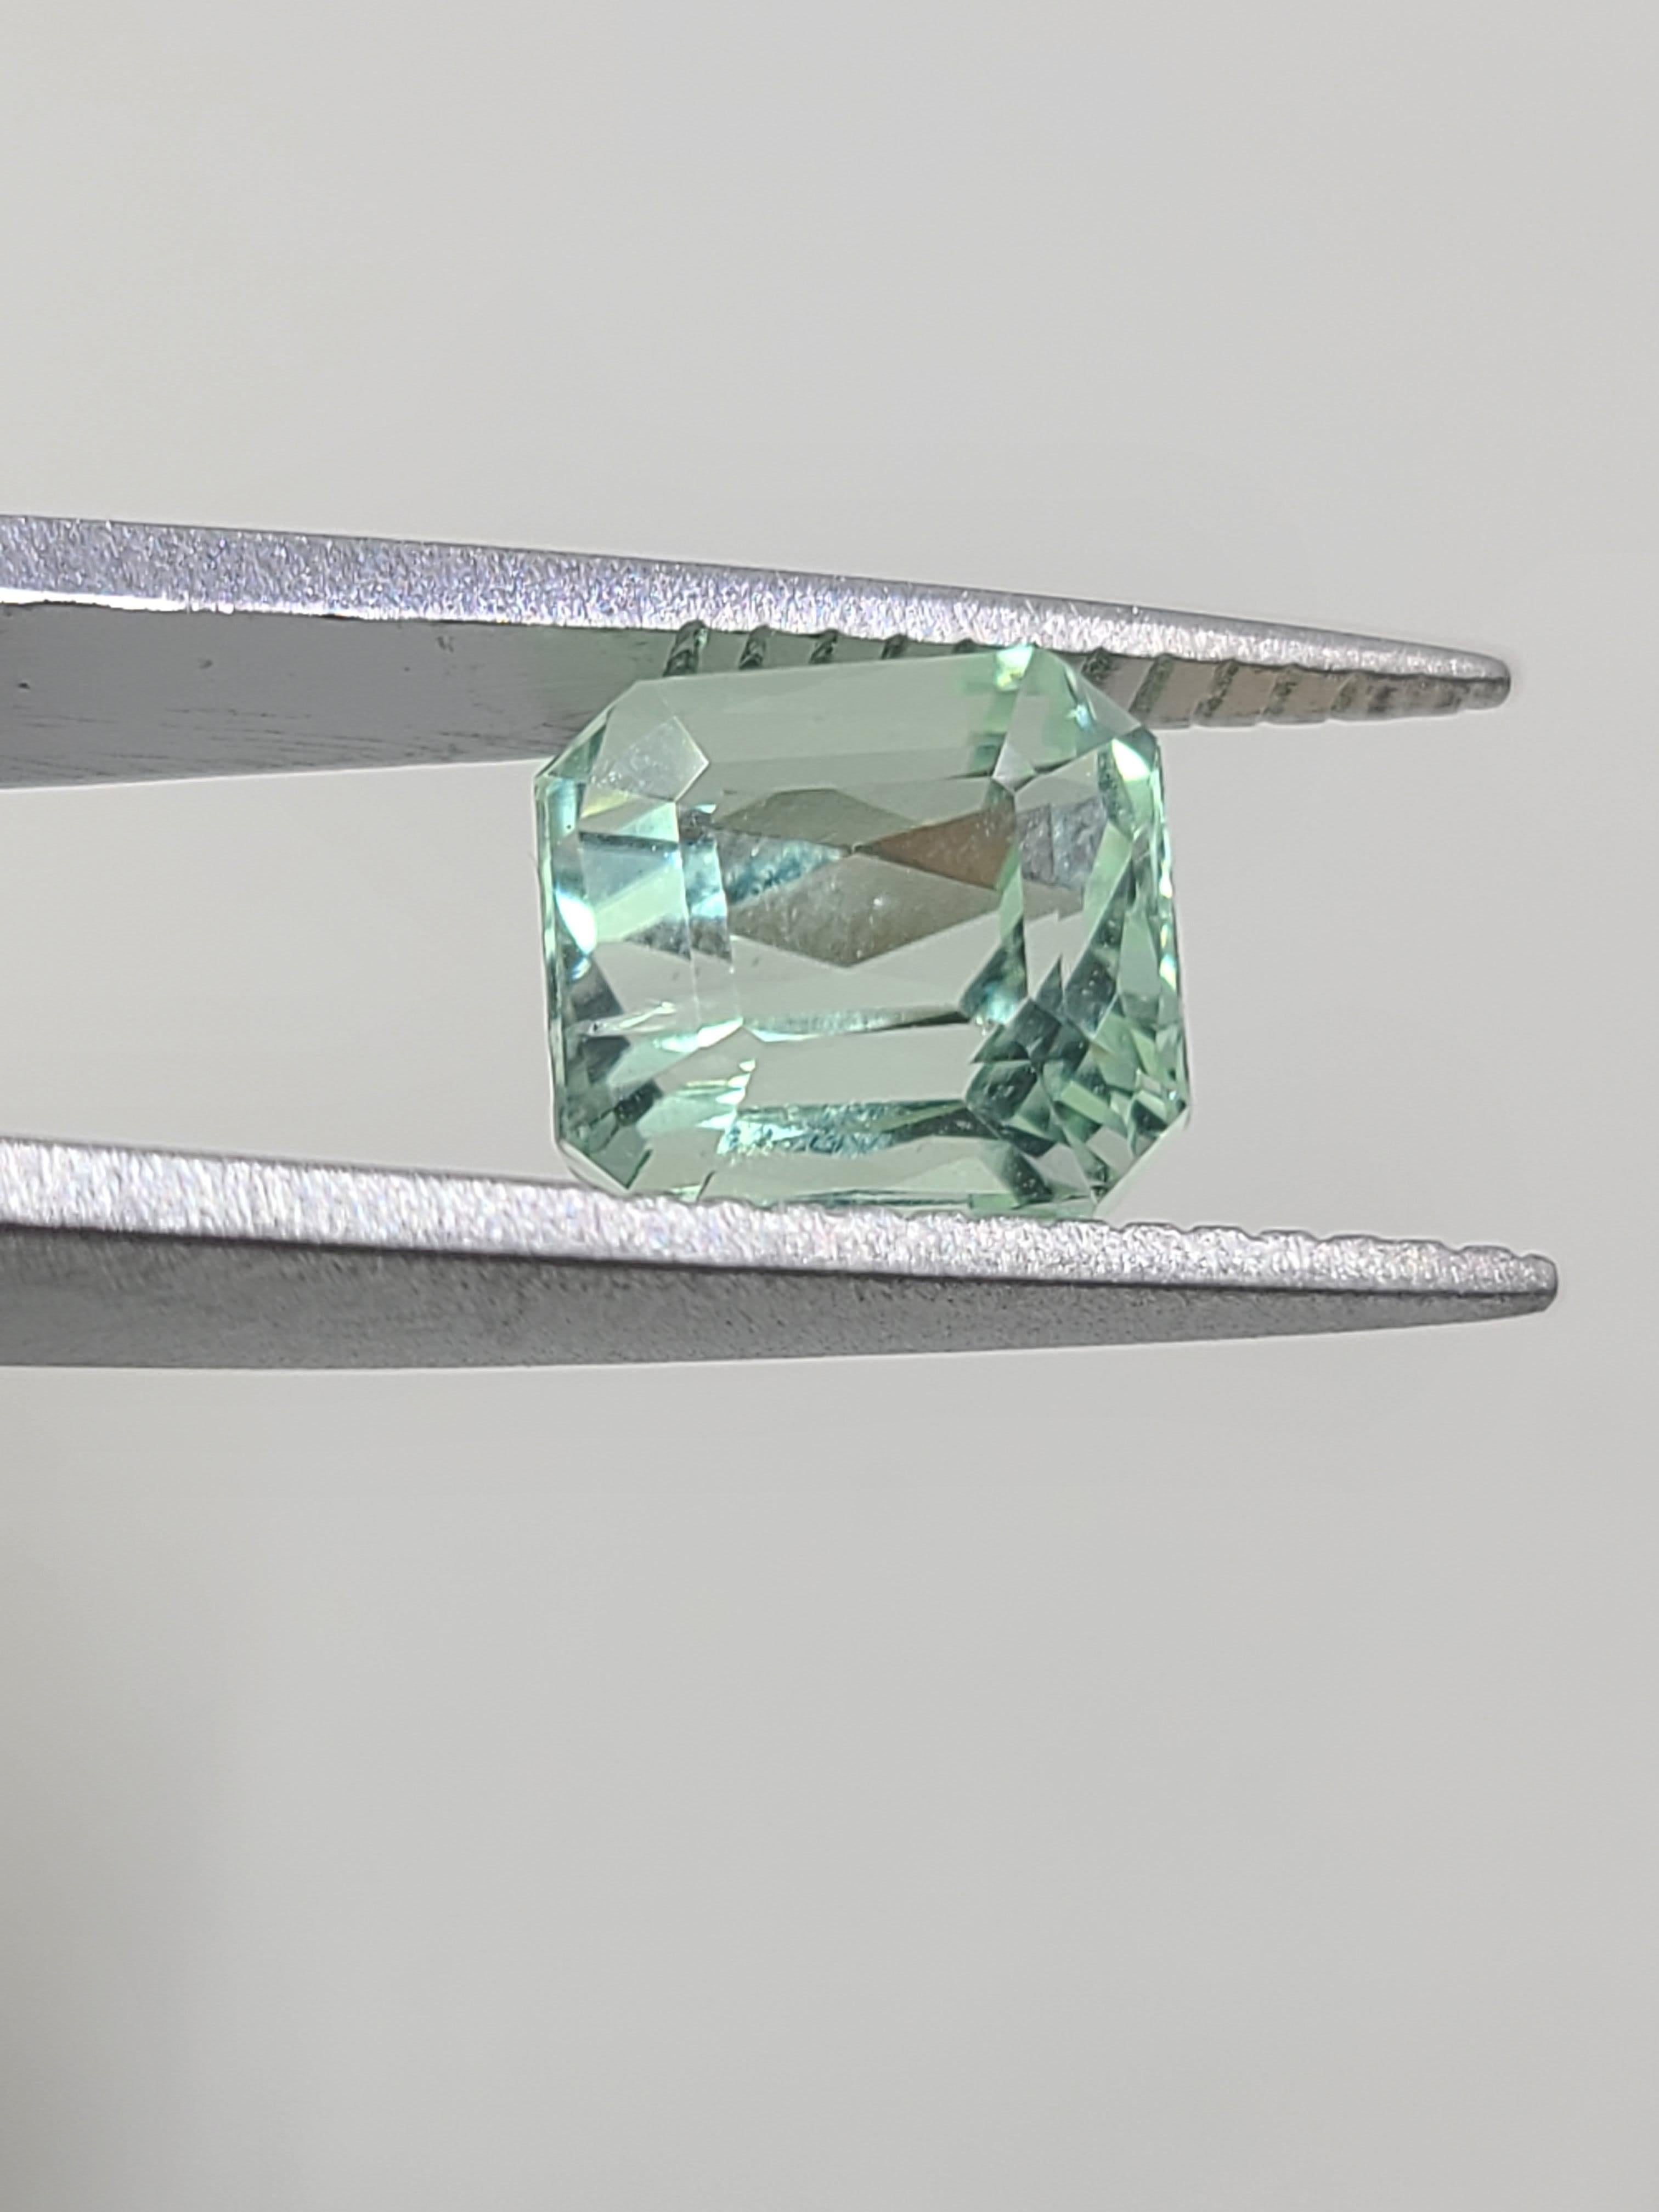 This high-quality Mozambique tourmaline exhibits a light shade of bluish-green, reminiscent of the aqua color of ocean water.

This single loose Mozambique tourmaline measures  8X7.50mm with a desirable octagon shape. 

Set this beautiful and unique